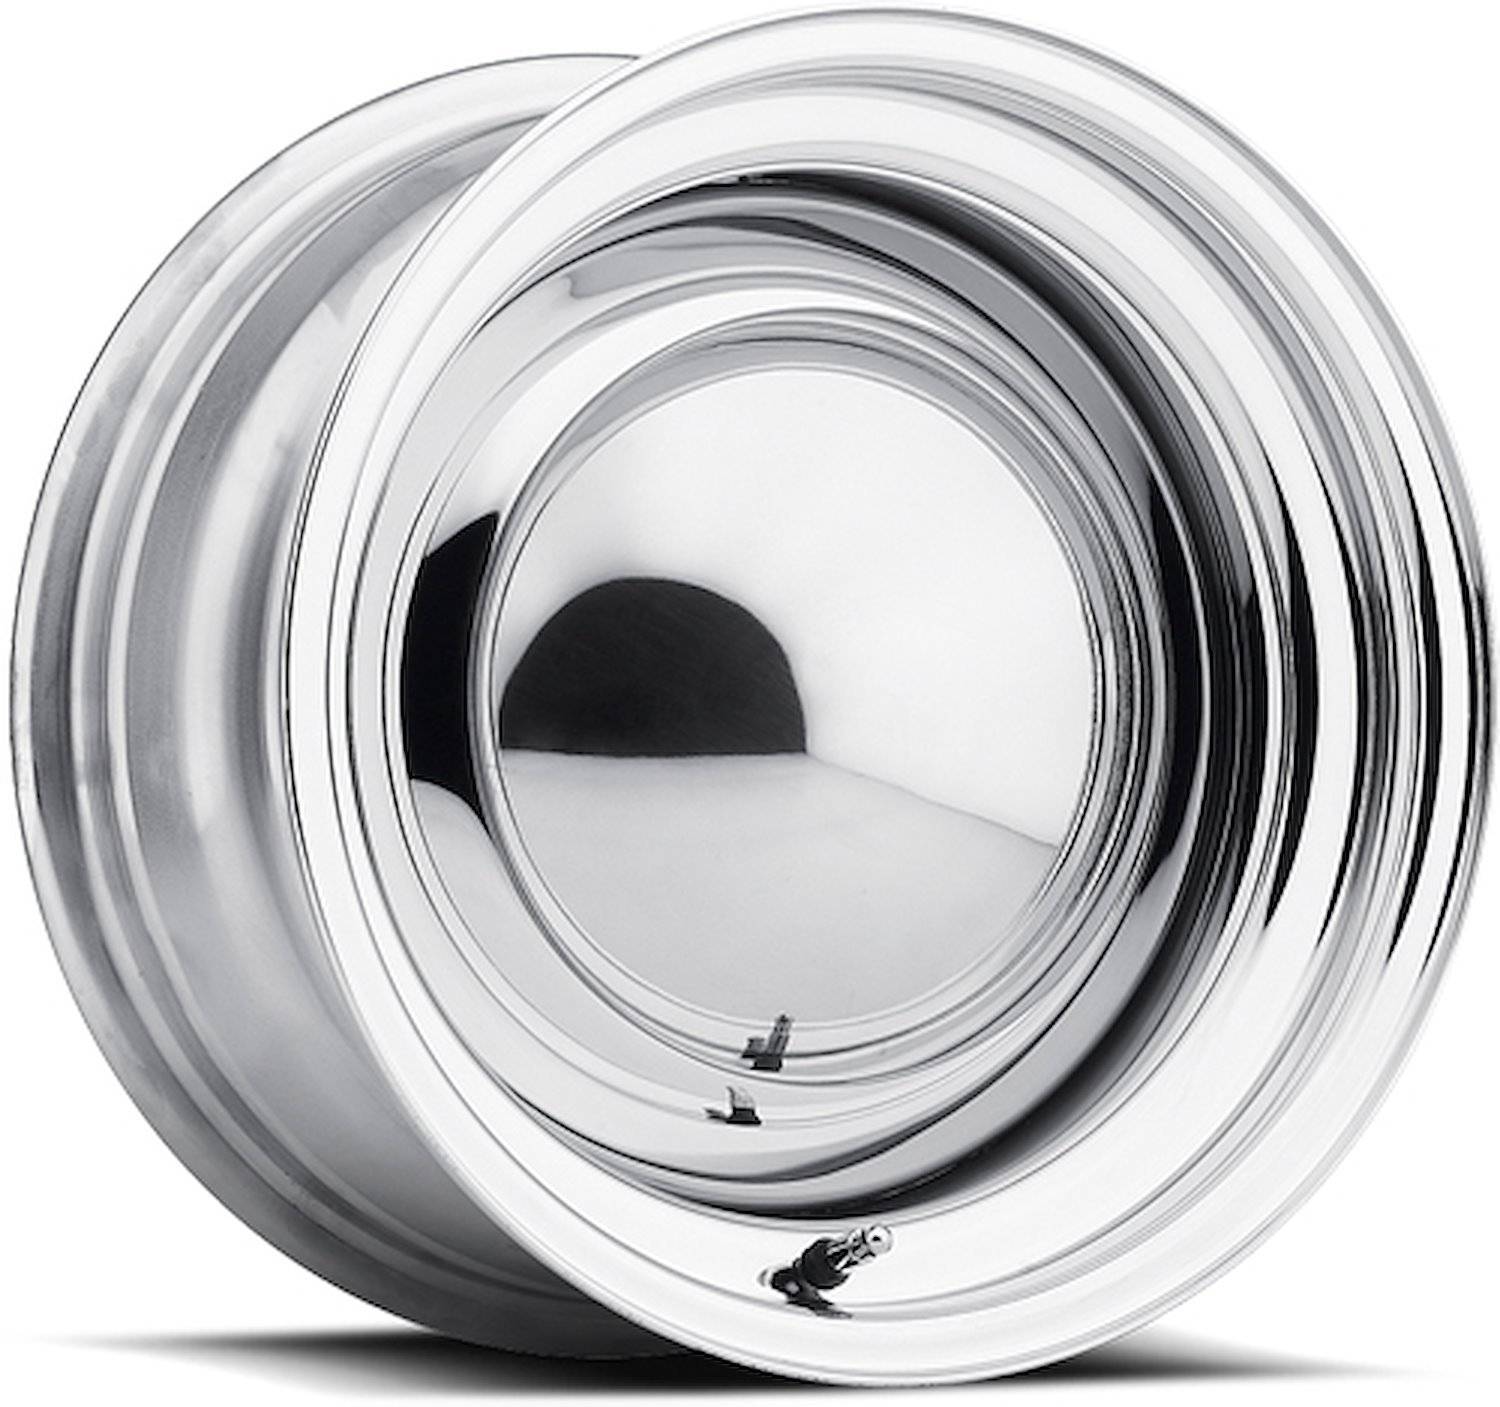 Solid Wheel Chrome 15X6 5X45 5X475 Bolt Circle 4 Back Spacing +13 offset 319 Center Bore 1500 lbs Load Rating